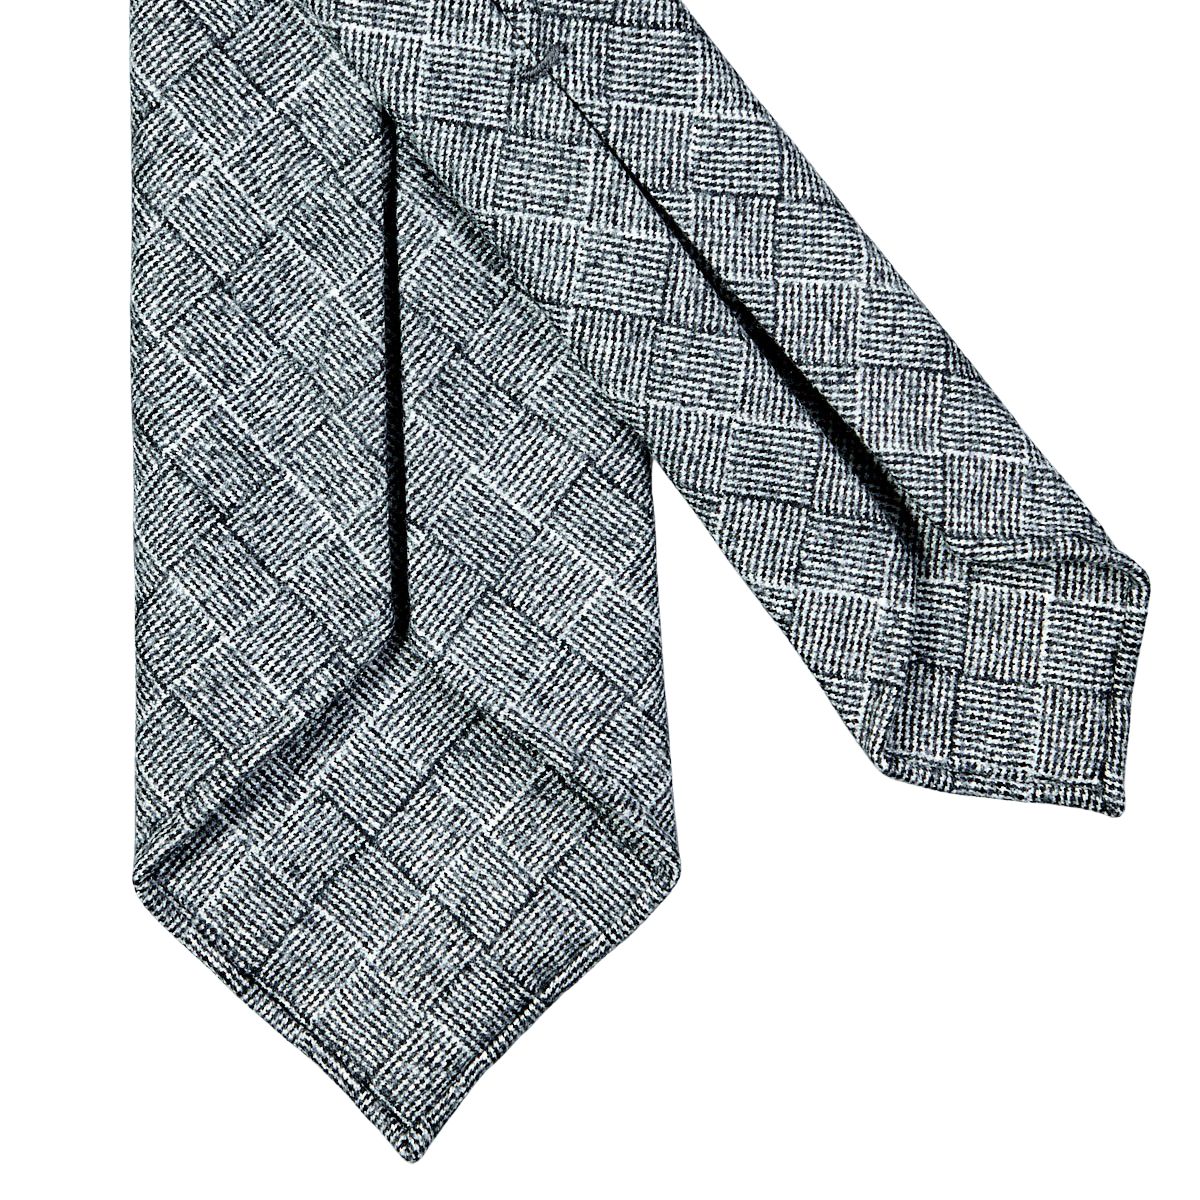 A grey checked 7-fold vintage wool tie on a white background, specifically the Dreaming of Monday wool tie.